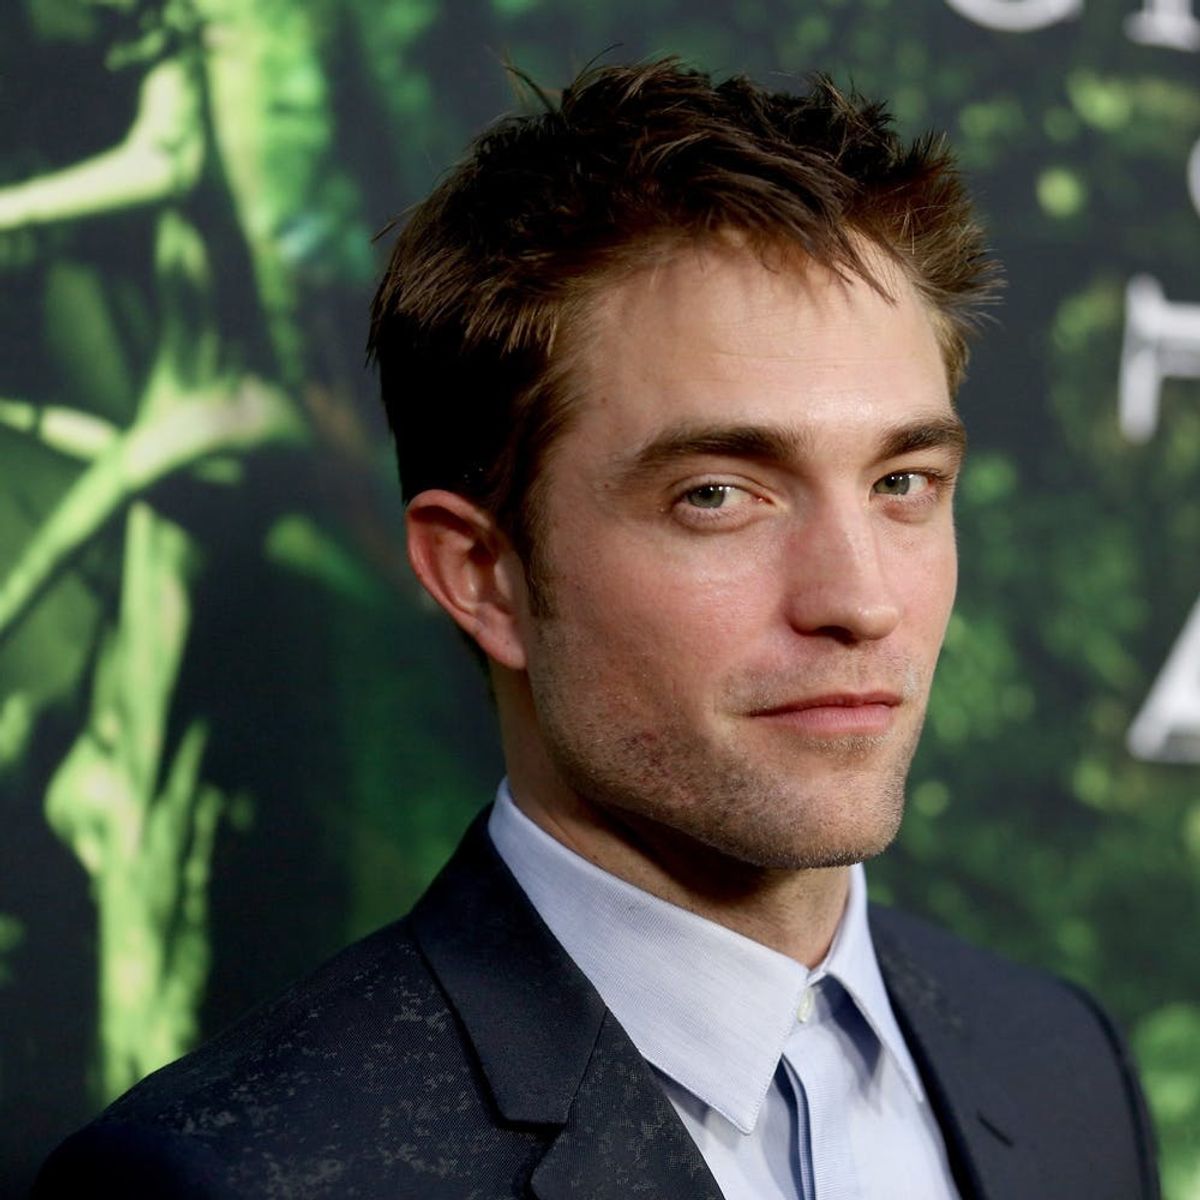 Robert Pattinson Used to Be Roommates With Dustin Diamond (Yep, Screech from “Saved by the Bell”)